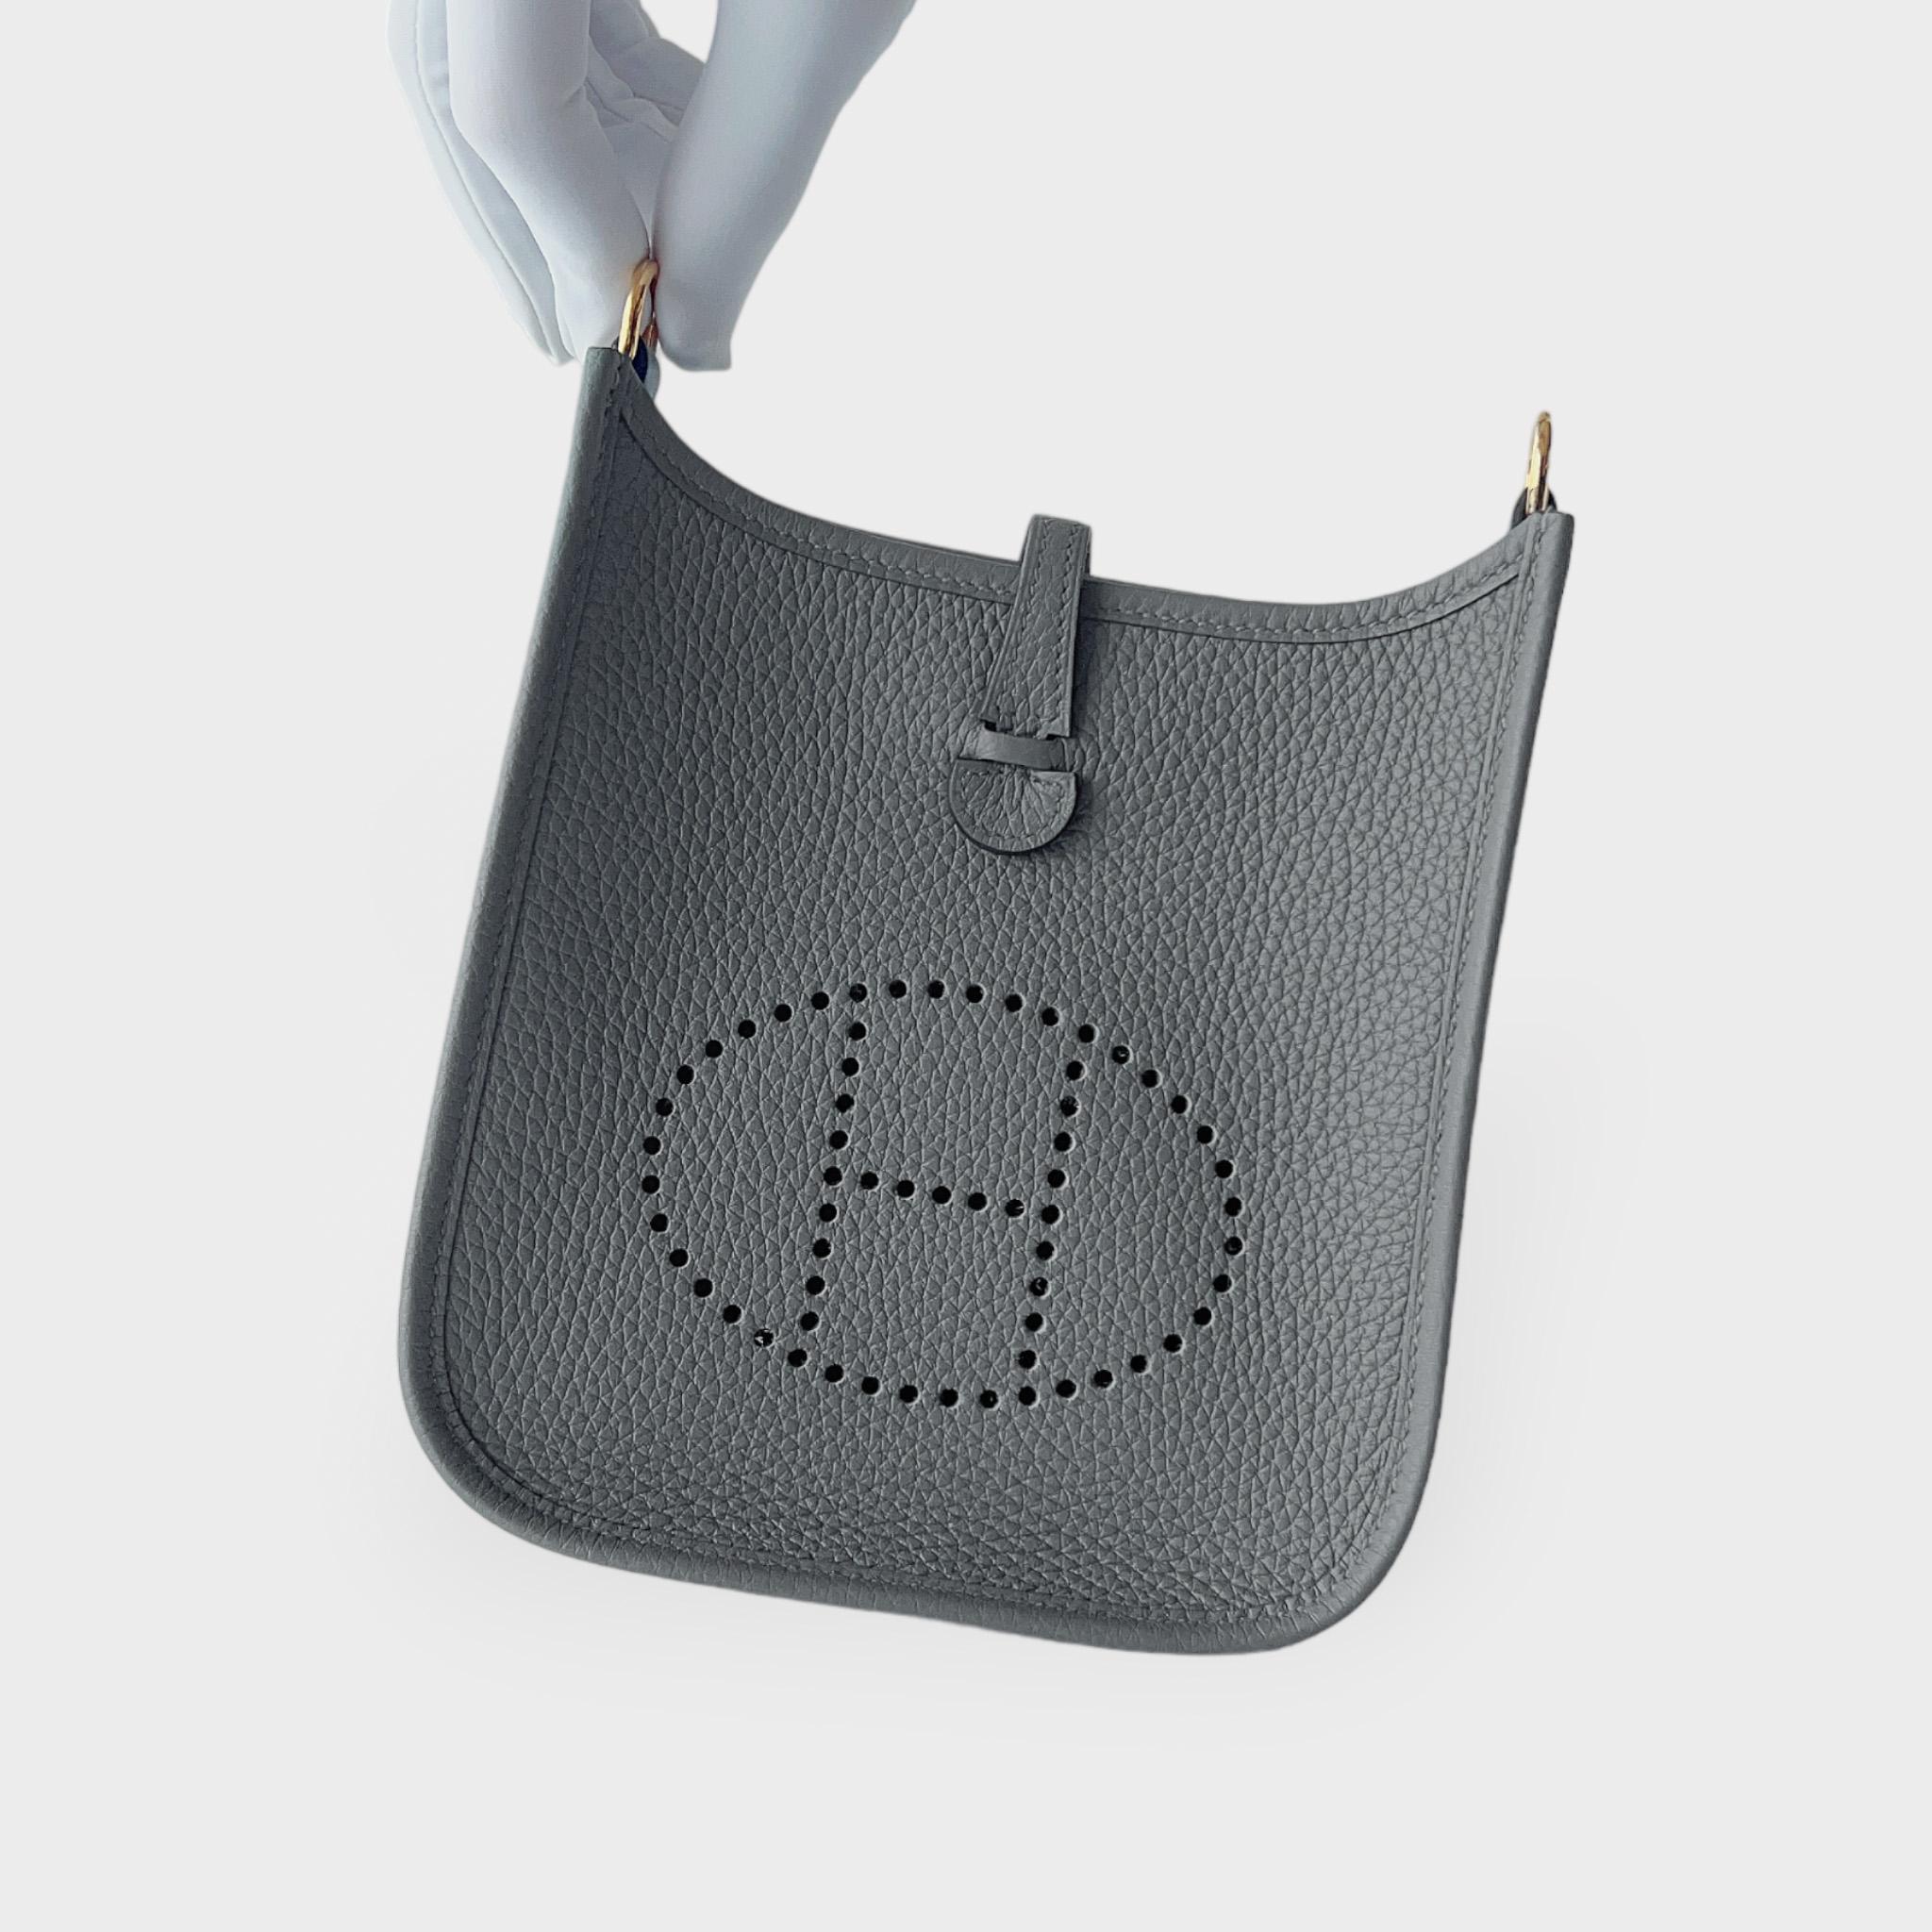 The Hermes Mini Evelyne 16 in Gris Meyer is a casual design that can be used for your everyday routine. This is the smallest size Hermes Evelyne bag and is made from handcrafted Gris Meyer Clemence leather, making it harder to scratch or become